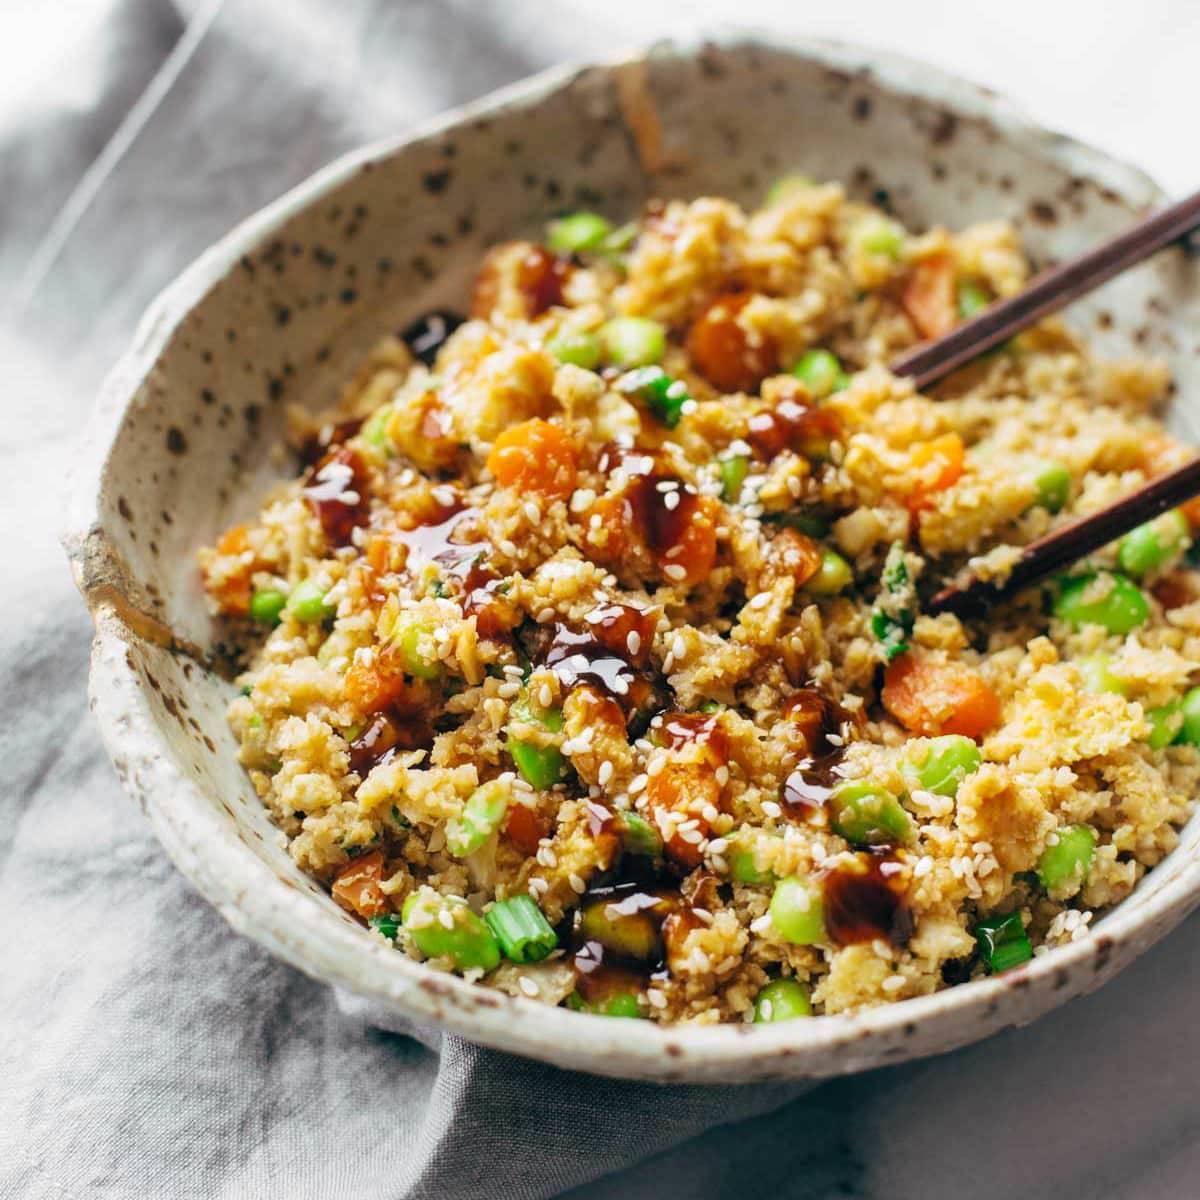 Savory Cauliflower Symphony: A Delightful Fusion of Riced Cauliflower, Colorful Vegetables, and a Medley of Exquisite Asian Flavors in this Irresistible Fried Rice Delicacy.